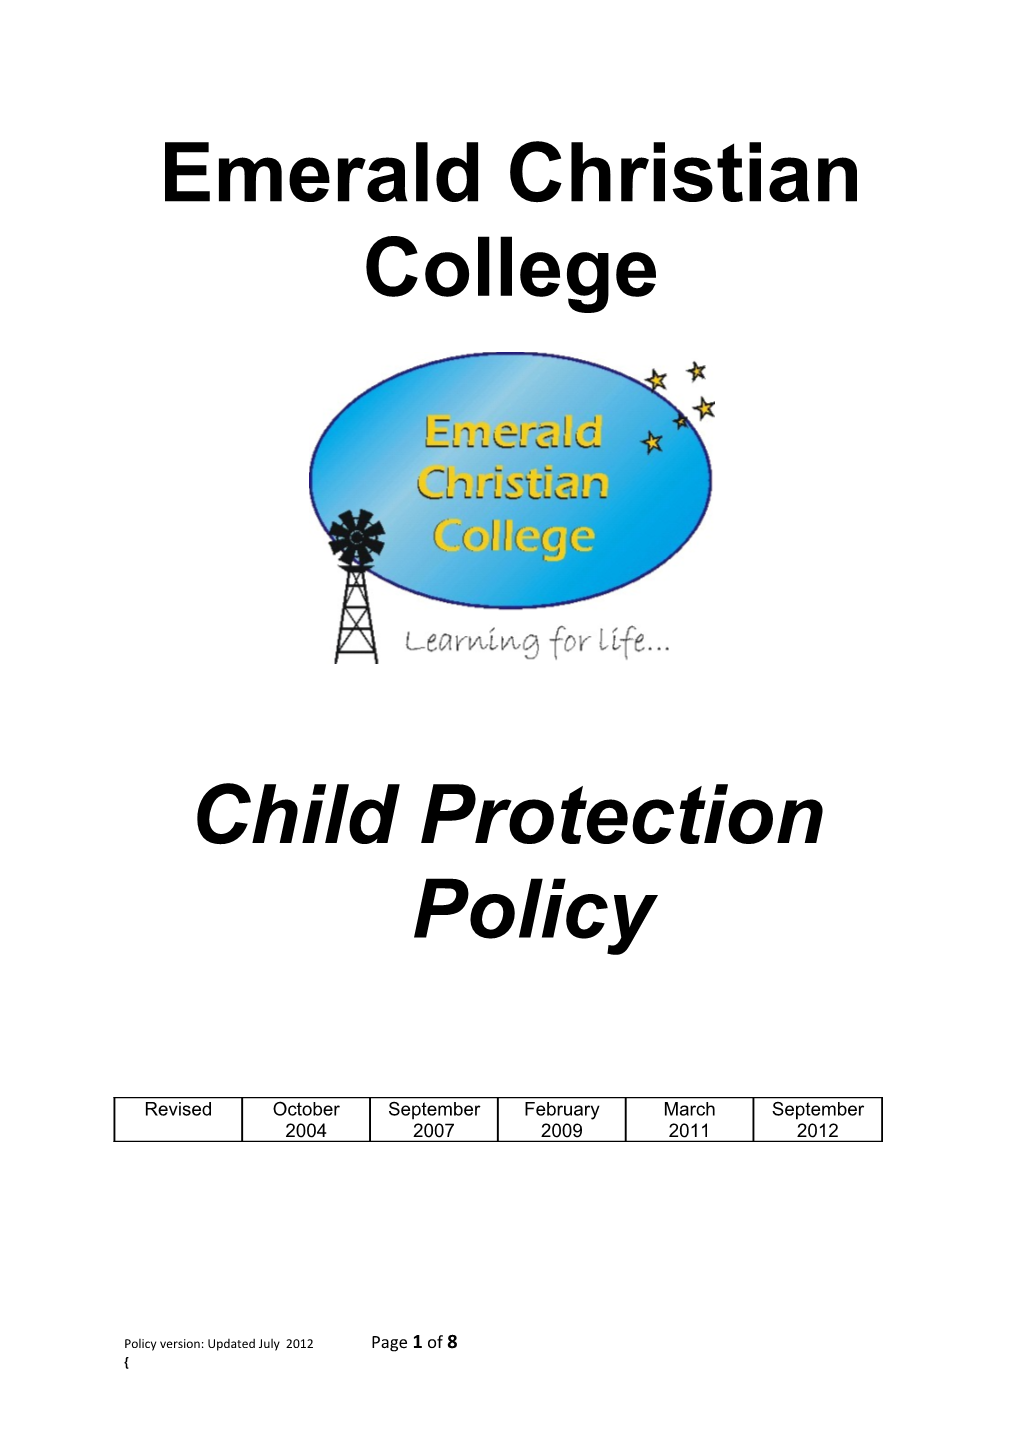 Child Protection Policy Emerald Christian College